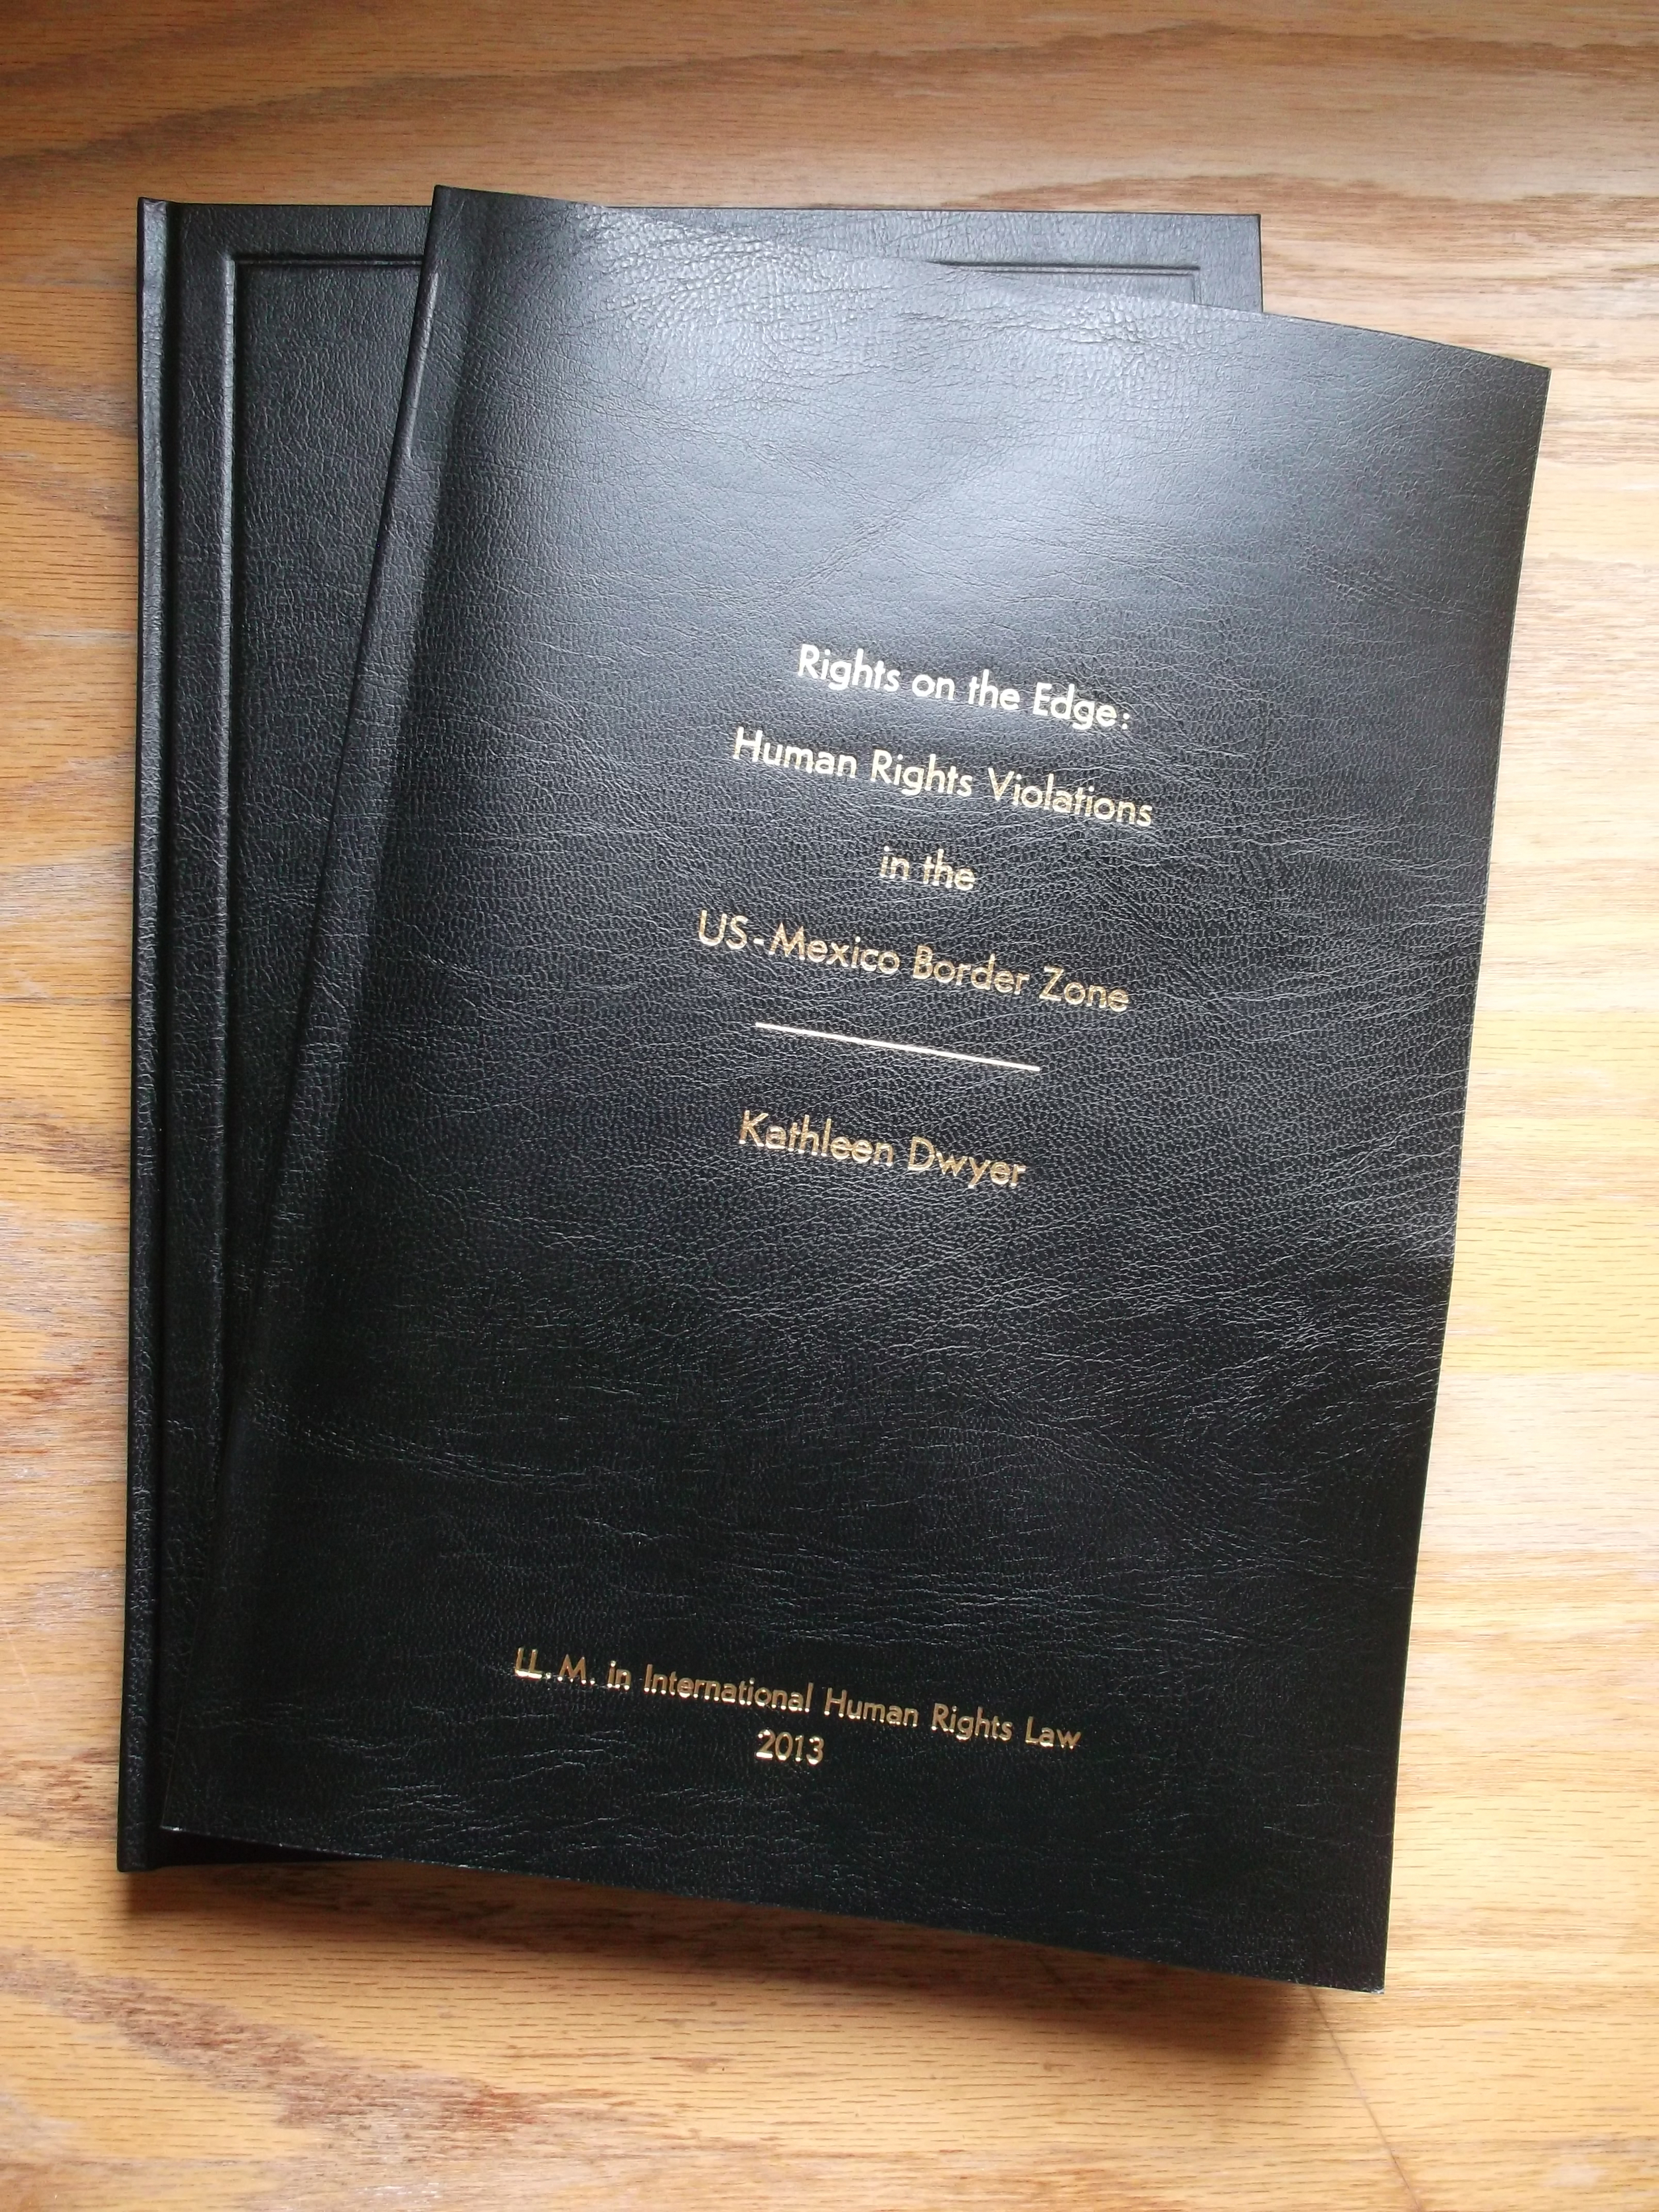 And master thesis